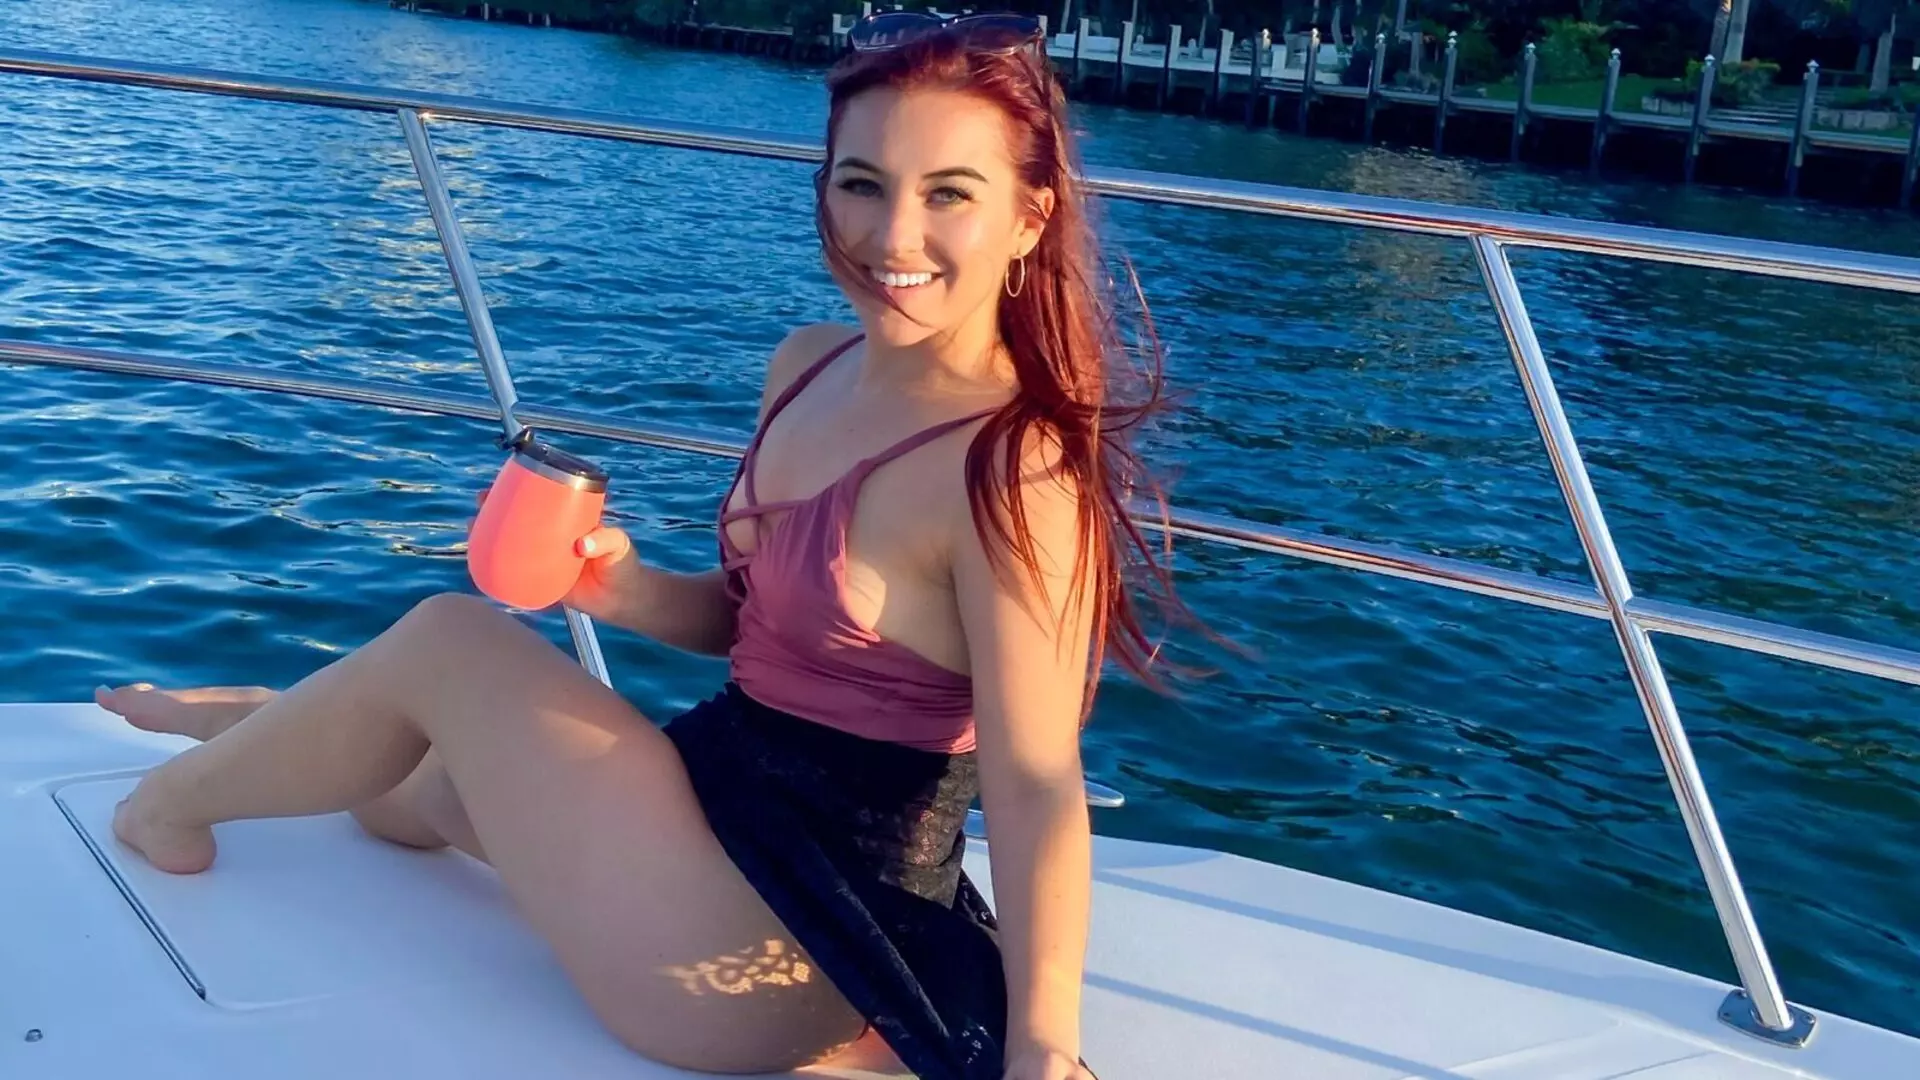 EmmiMorgan's Premium Pictures and Videos 